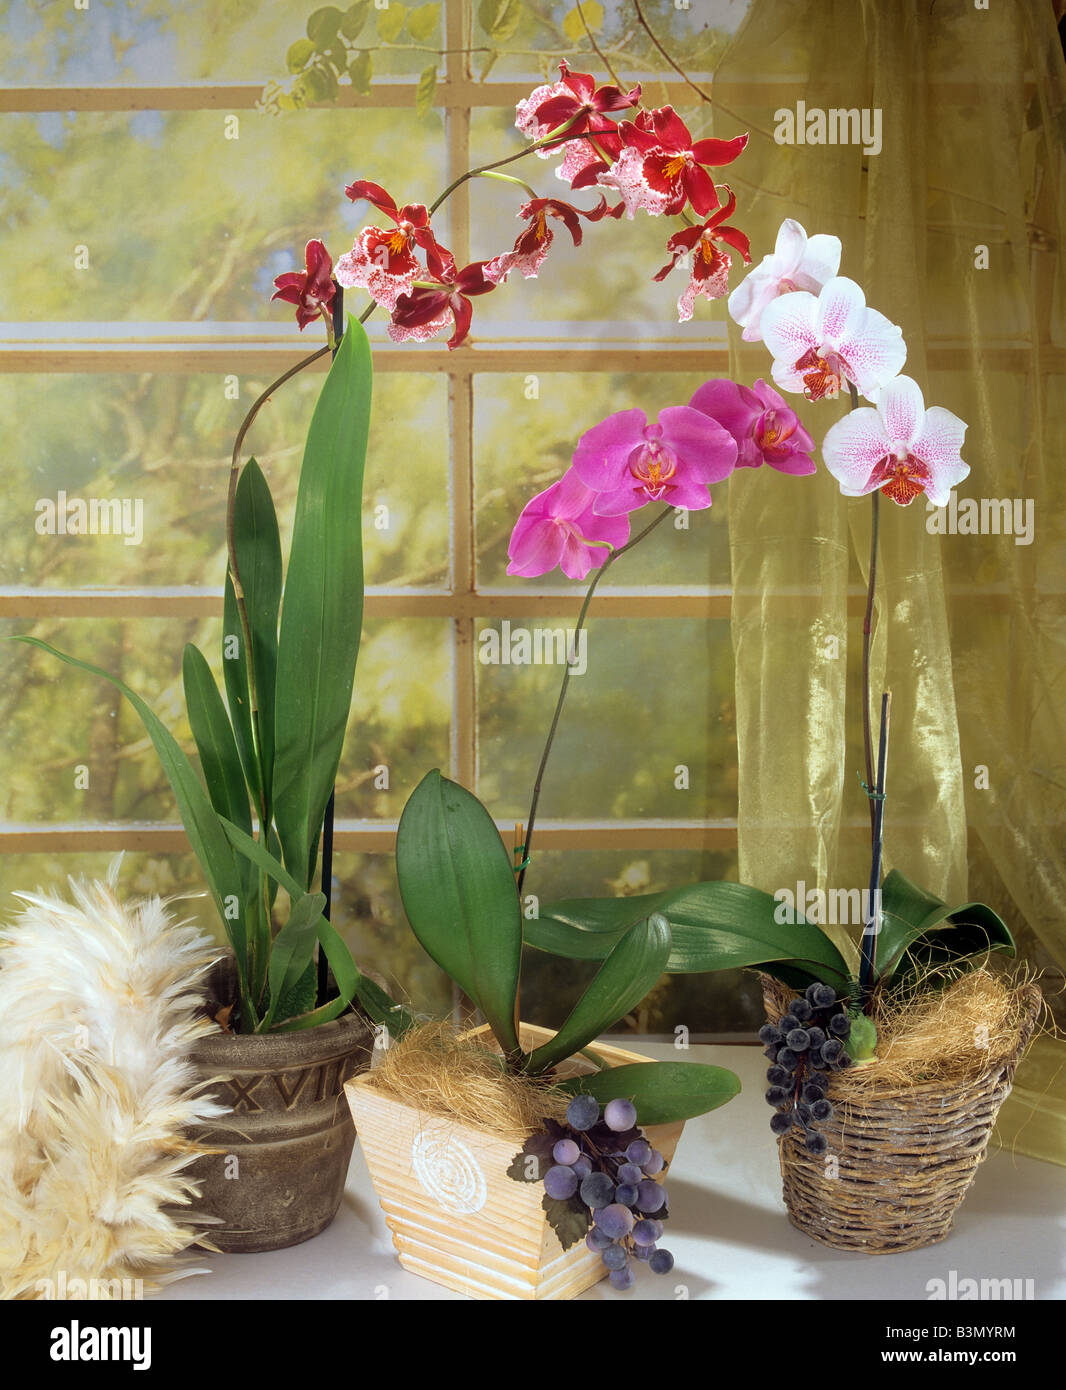 different orchids at the window Stock Photo